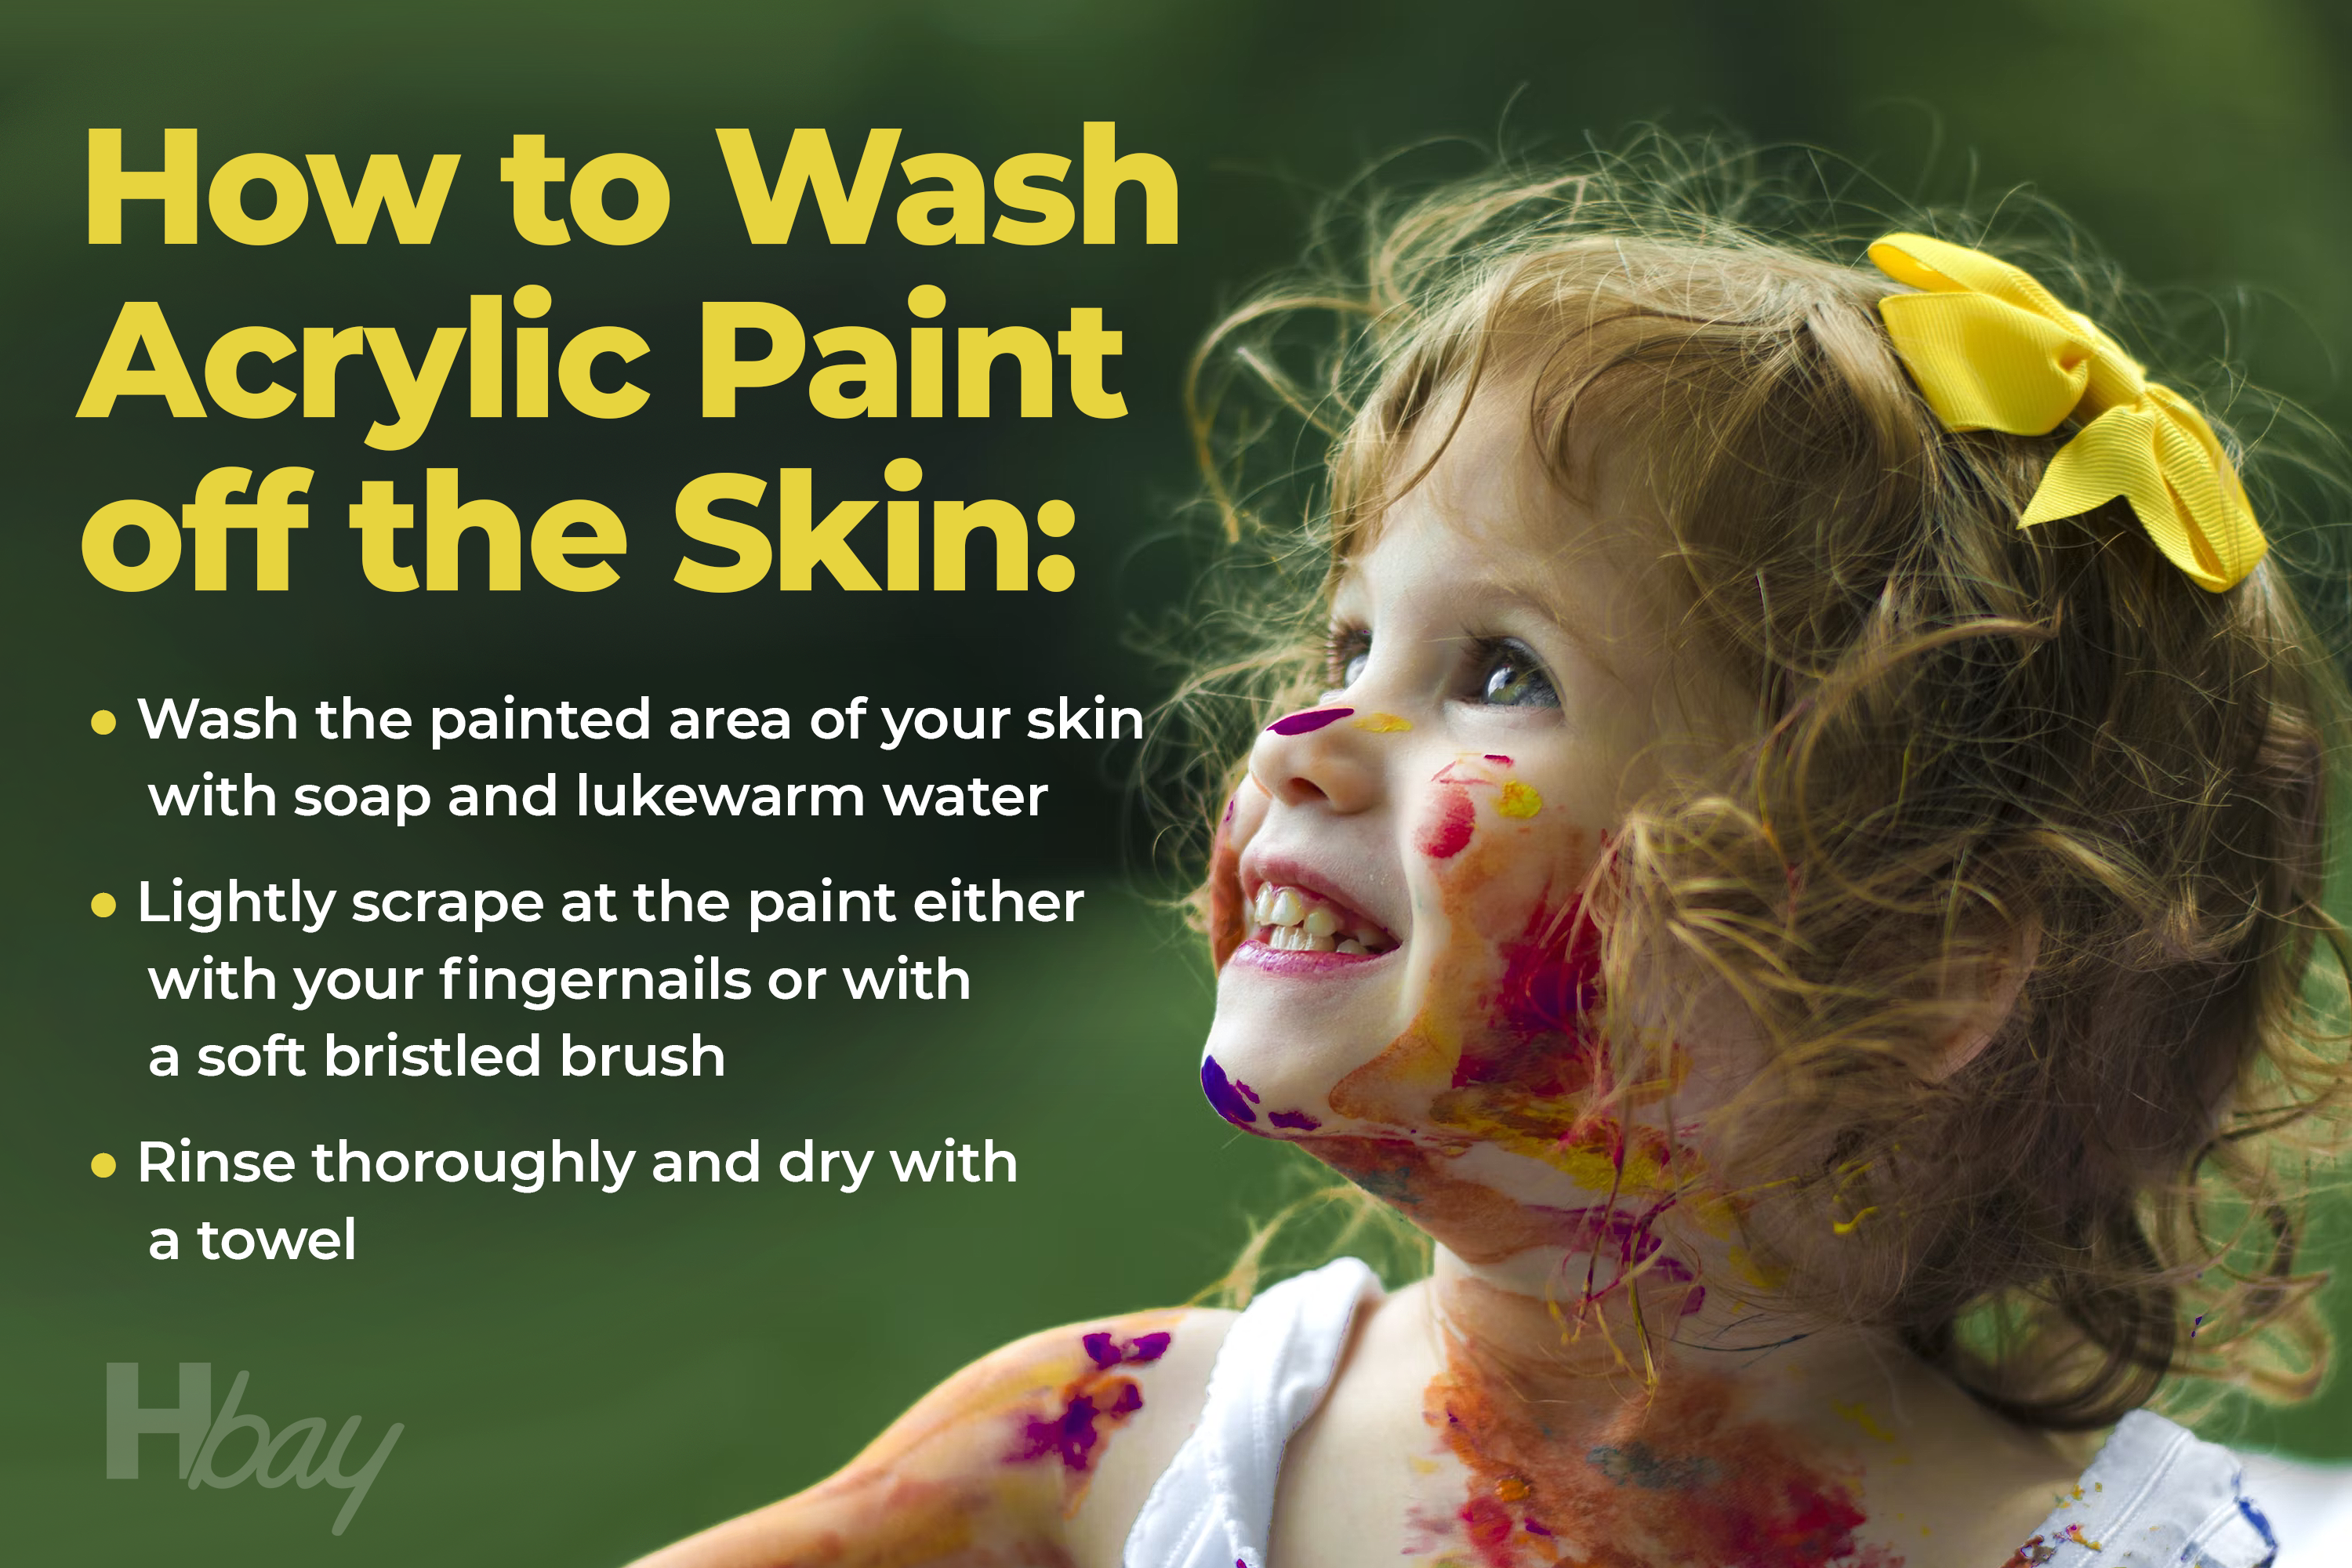 How to wash acrylic paint off the skin